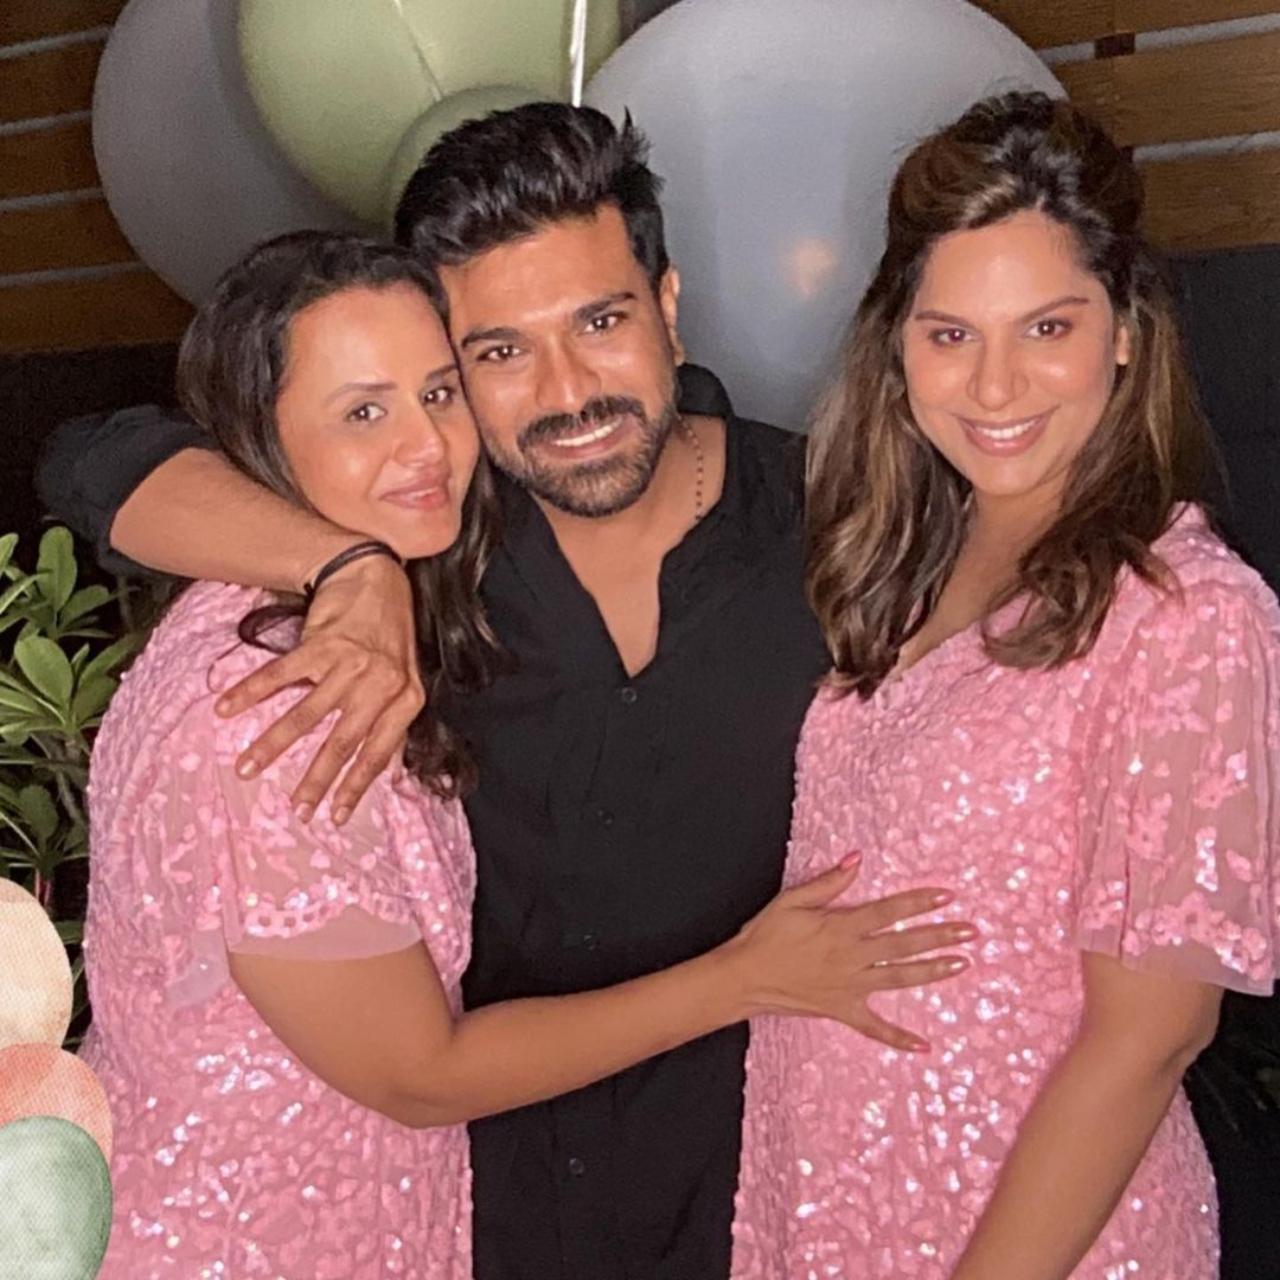 Family members also graced the occasion, including the actor's sisters Sushmita and Sreeja. Upasana seemed flushed with the glow of motherhood in her pinky shimmery ensemble